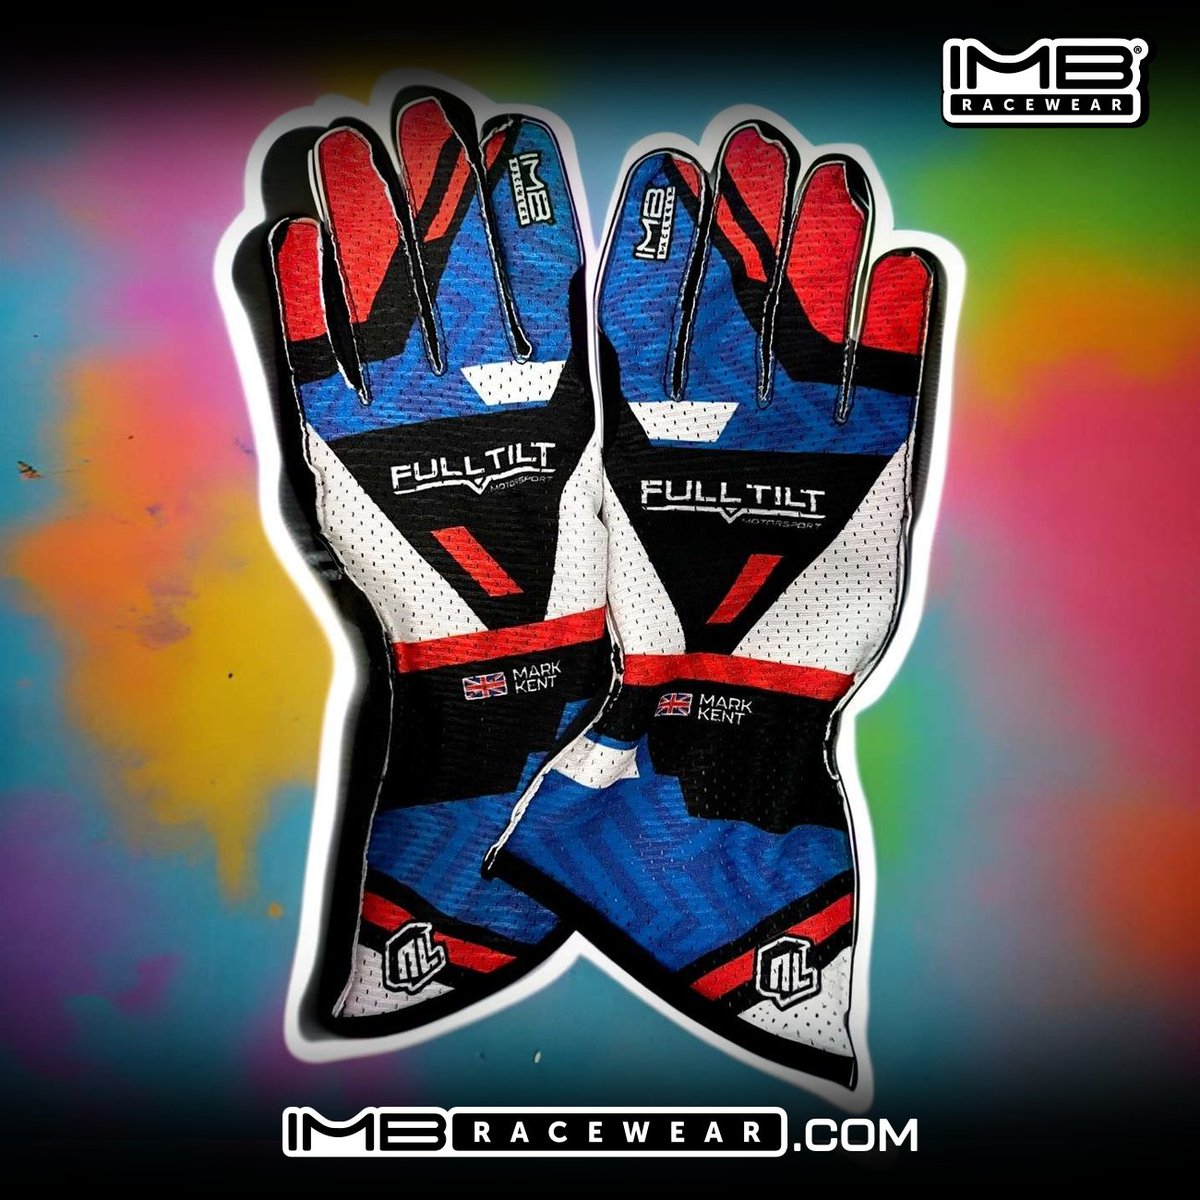 #NoLimits means you choose everything, just like @TimeConsumer_MK from @FullTiltVMsport has done for their team. Create your perfect wear now only at imbracewear.com #esportsf1 #simgloves #gaming #motorsport #f1